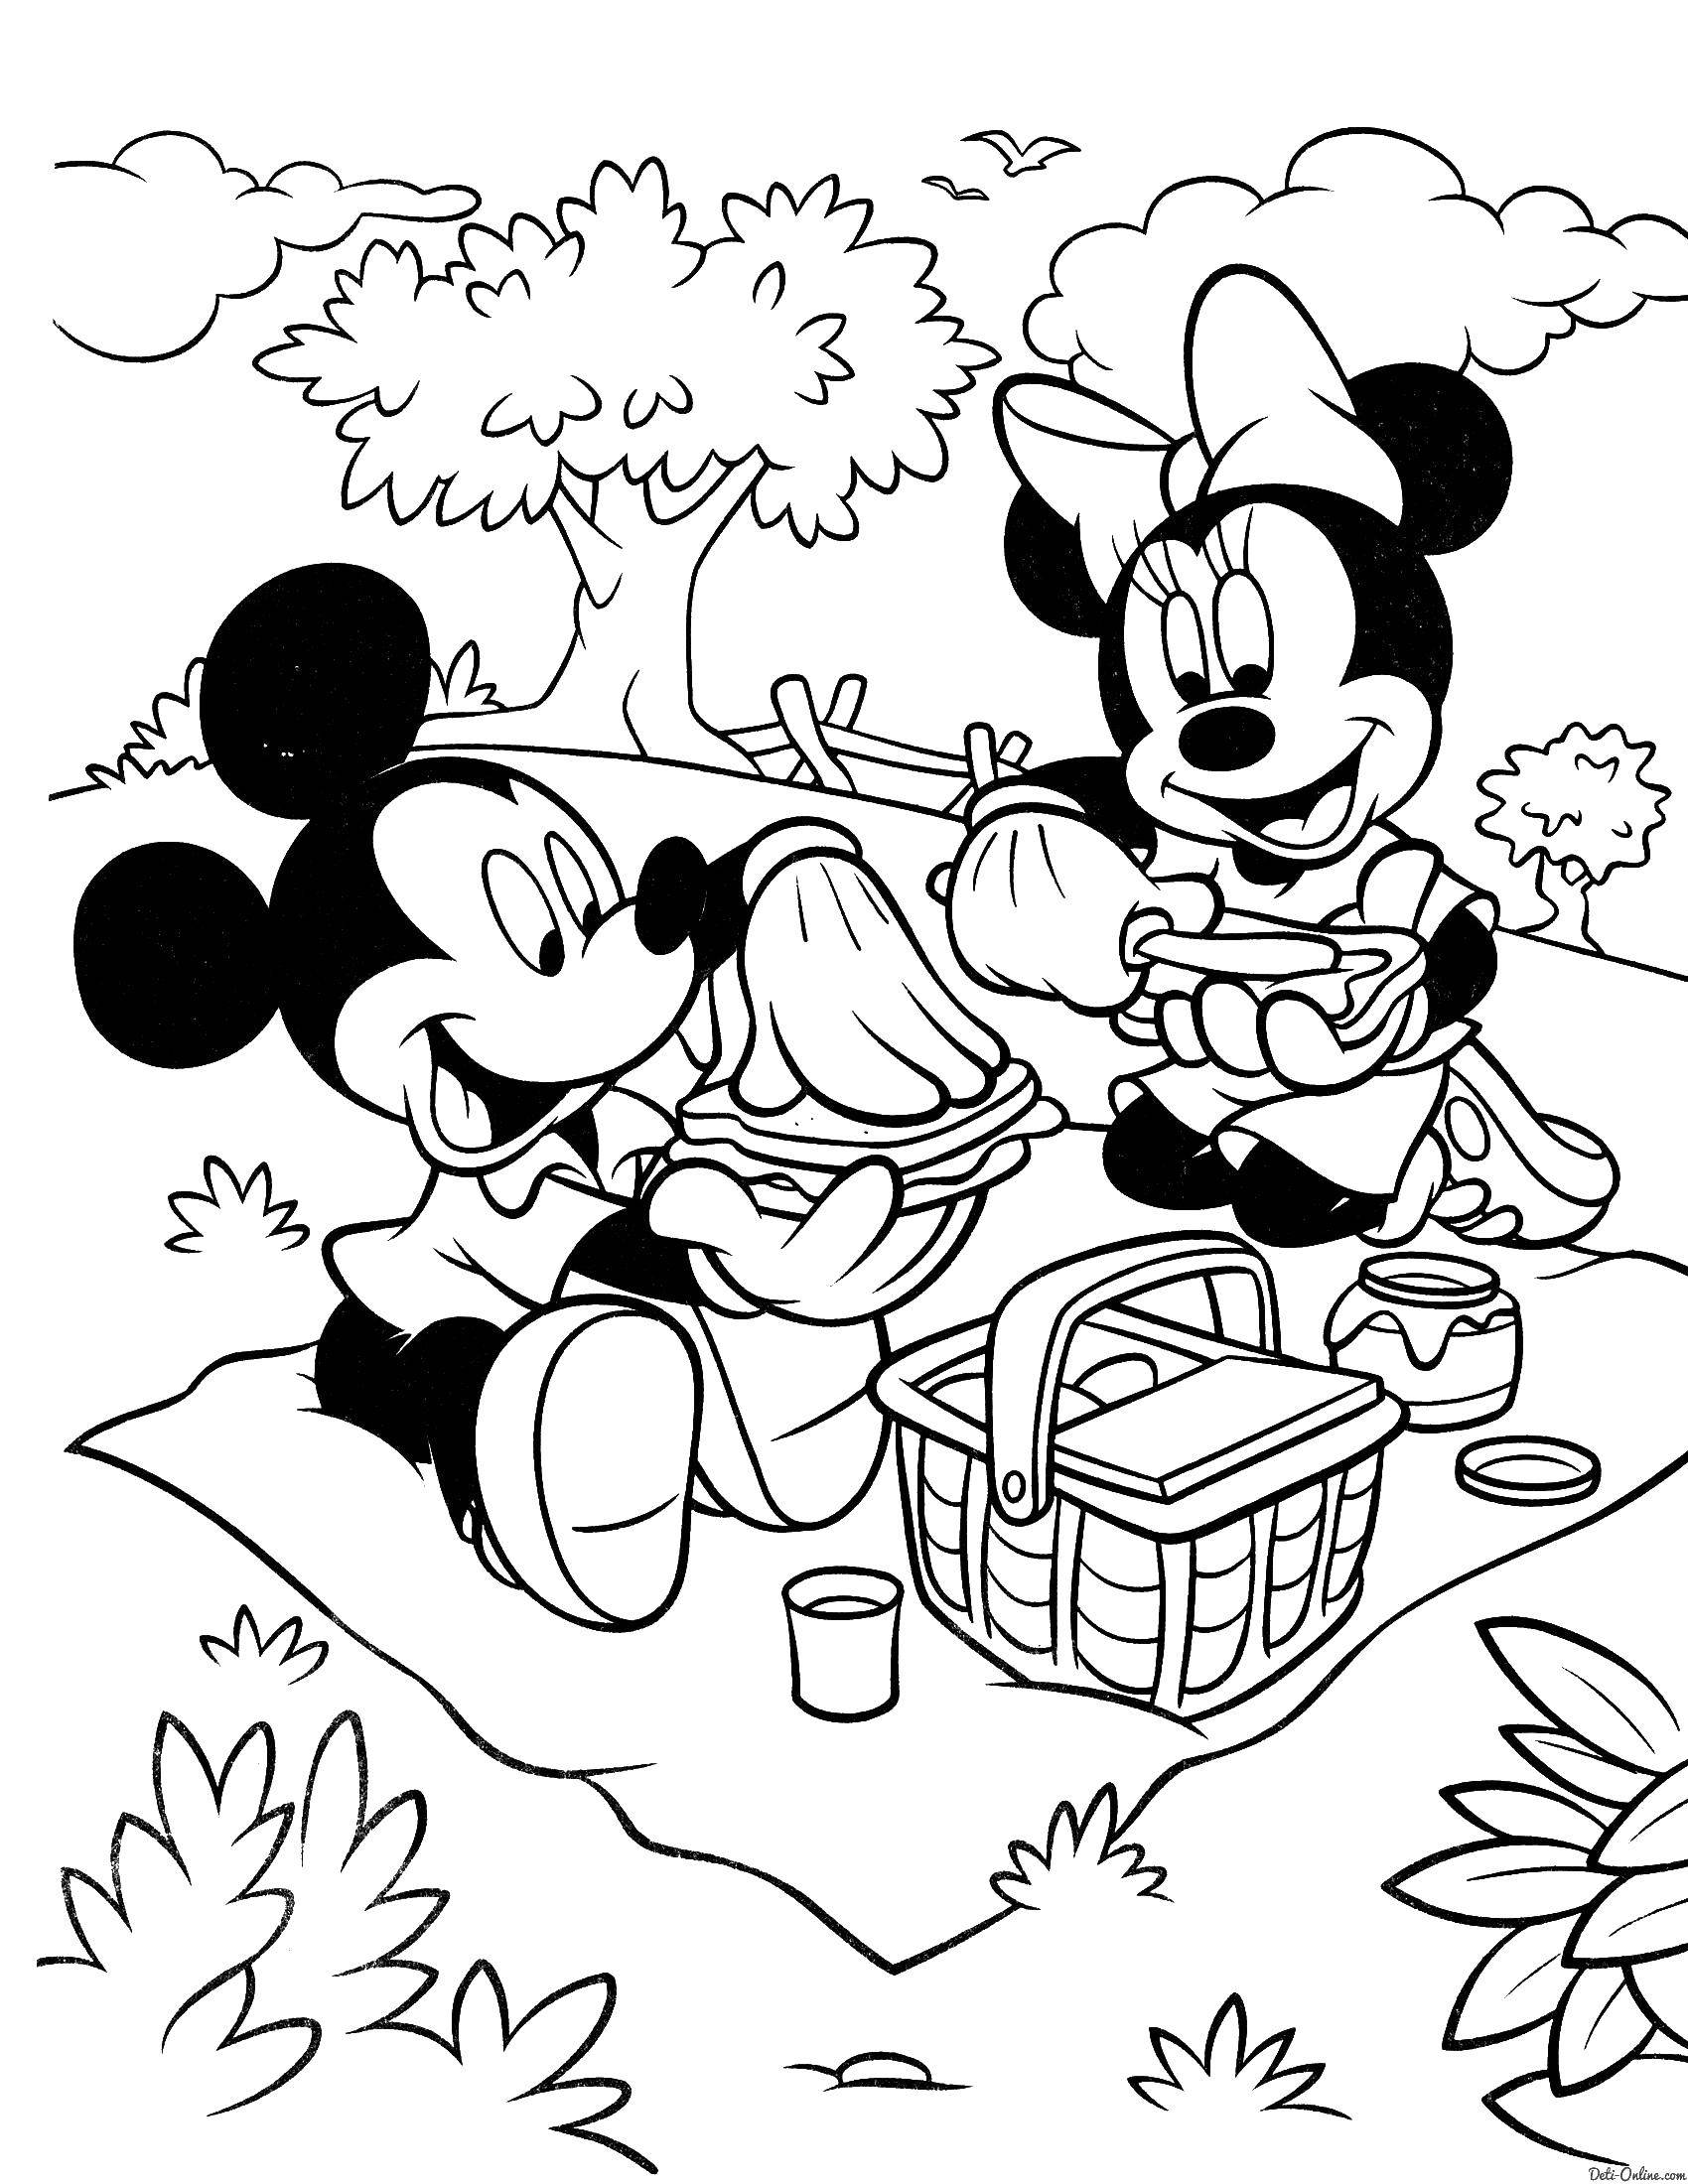 Coloring Mickey mouse and Minnie mouse on a picnic. Category Mickey mouse. Tags:  Disney, Mickey Mouse, Minnie Mouse.